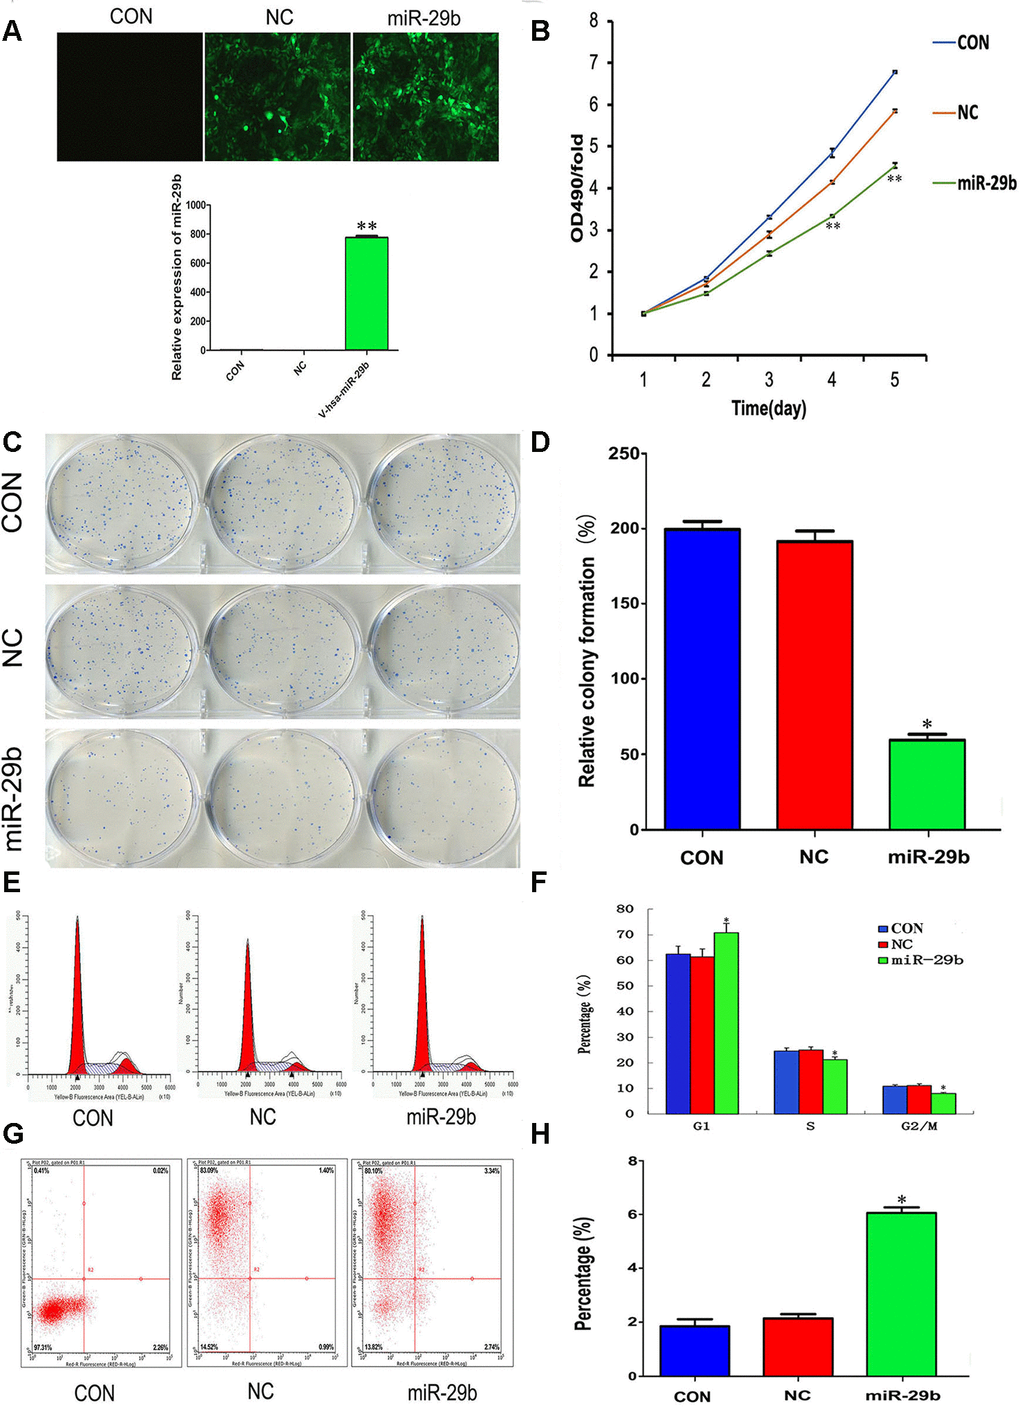 Overexpression of miR-29b suppresses proliferation and induces cell cycle arrest and apoptosis in cholangiocarcinoma cells. (A) Top: Representative fluorescence images of untransfected (CON), LV-miR-NC-transfected (NC), and LV-miR-29b-transfected (miR-29b) QBC939 cells (original magnification: 100×). Bottom: Relative miR-29b expression detected by qRT-PCR. (B) MTT assay results showing the time-course effect of miR-29b overexpression on the proliferation of QBC939 cells. (C) Representative images from colony formation assays. (D) Relative colony formation percentage. (E) Cell cycle distribution was subjected by flow cytometry. (F) Quantified histograms display the effect of miR-29b overexpression on cell cycle distribution. (G) Flow cytometry plots illustrating apoptosis in Annexin V/PI-stained QBC939 cells. (H) Quantified histograms display the effect of miR-29b overexpression on the apoptosis of QBC939 cells. The values presented are means ± SD. *PP